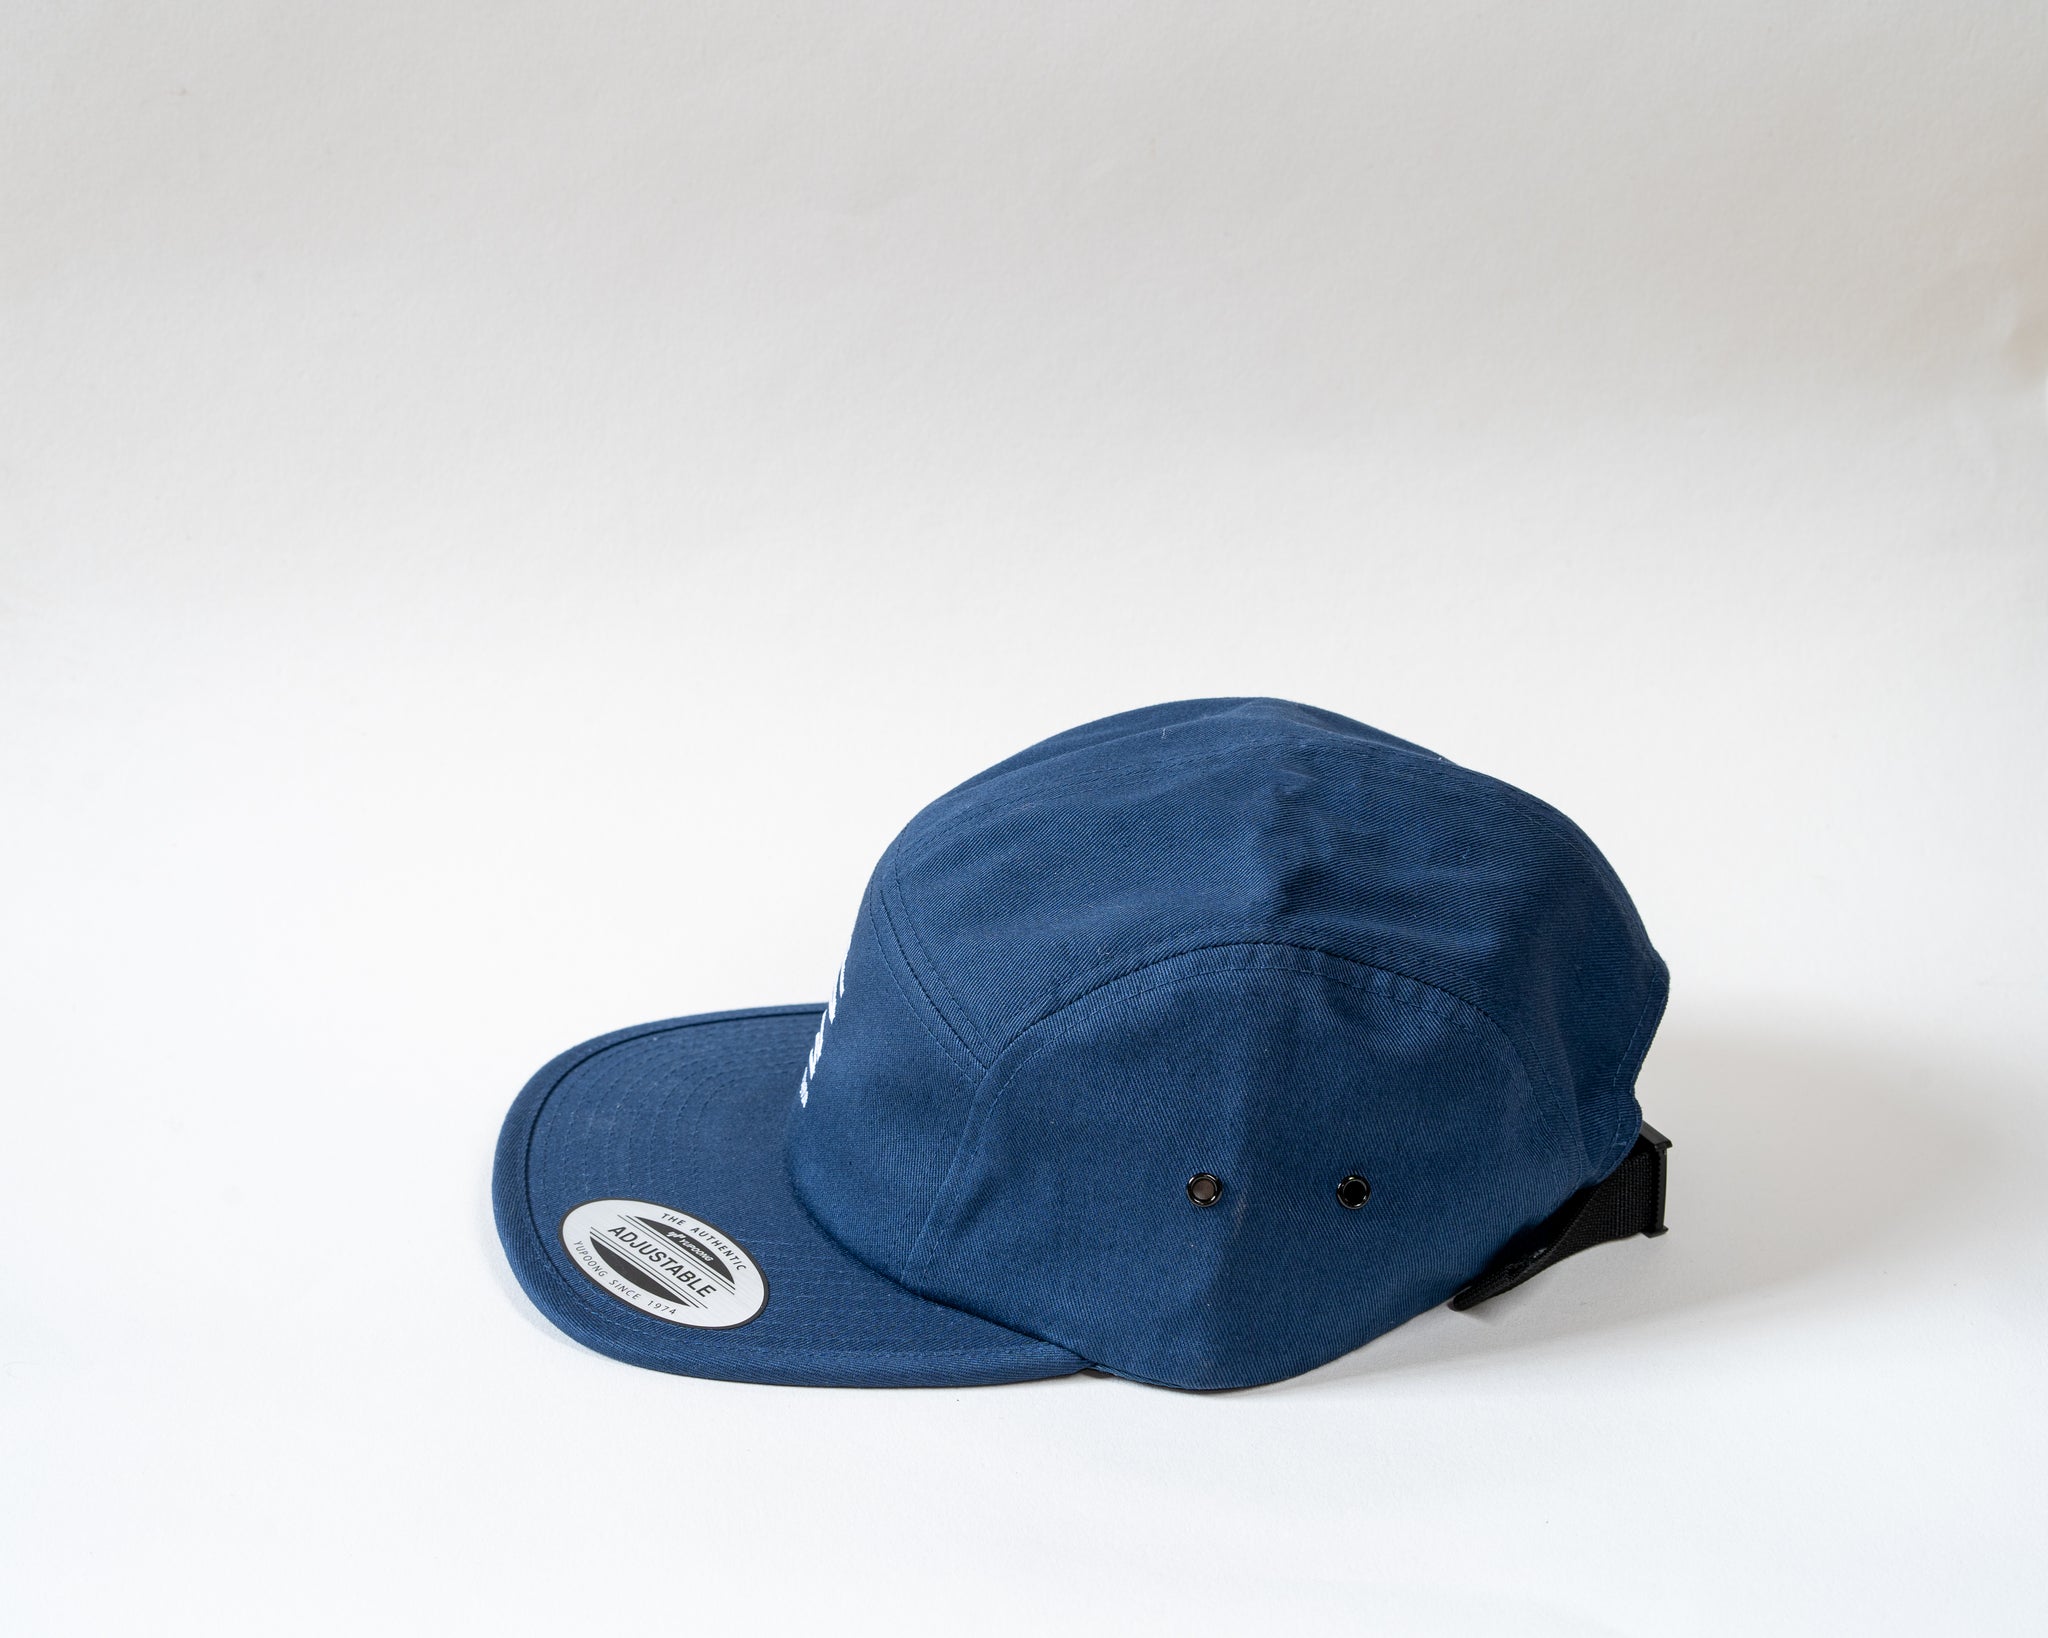 Navy 5 panel cap showcasing the side on a white background